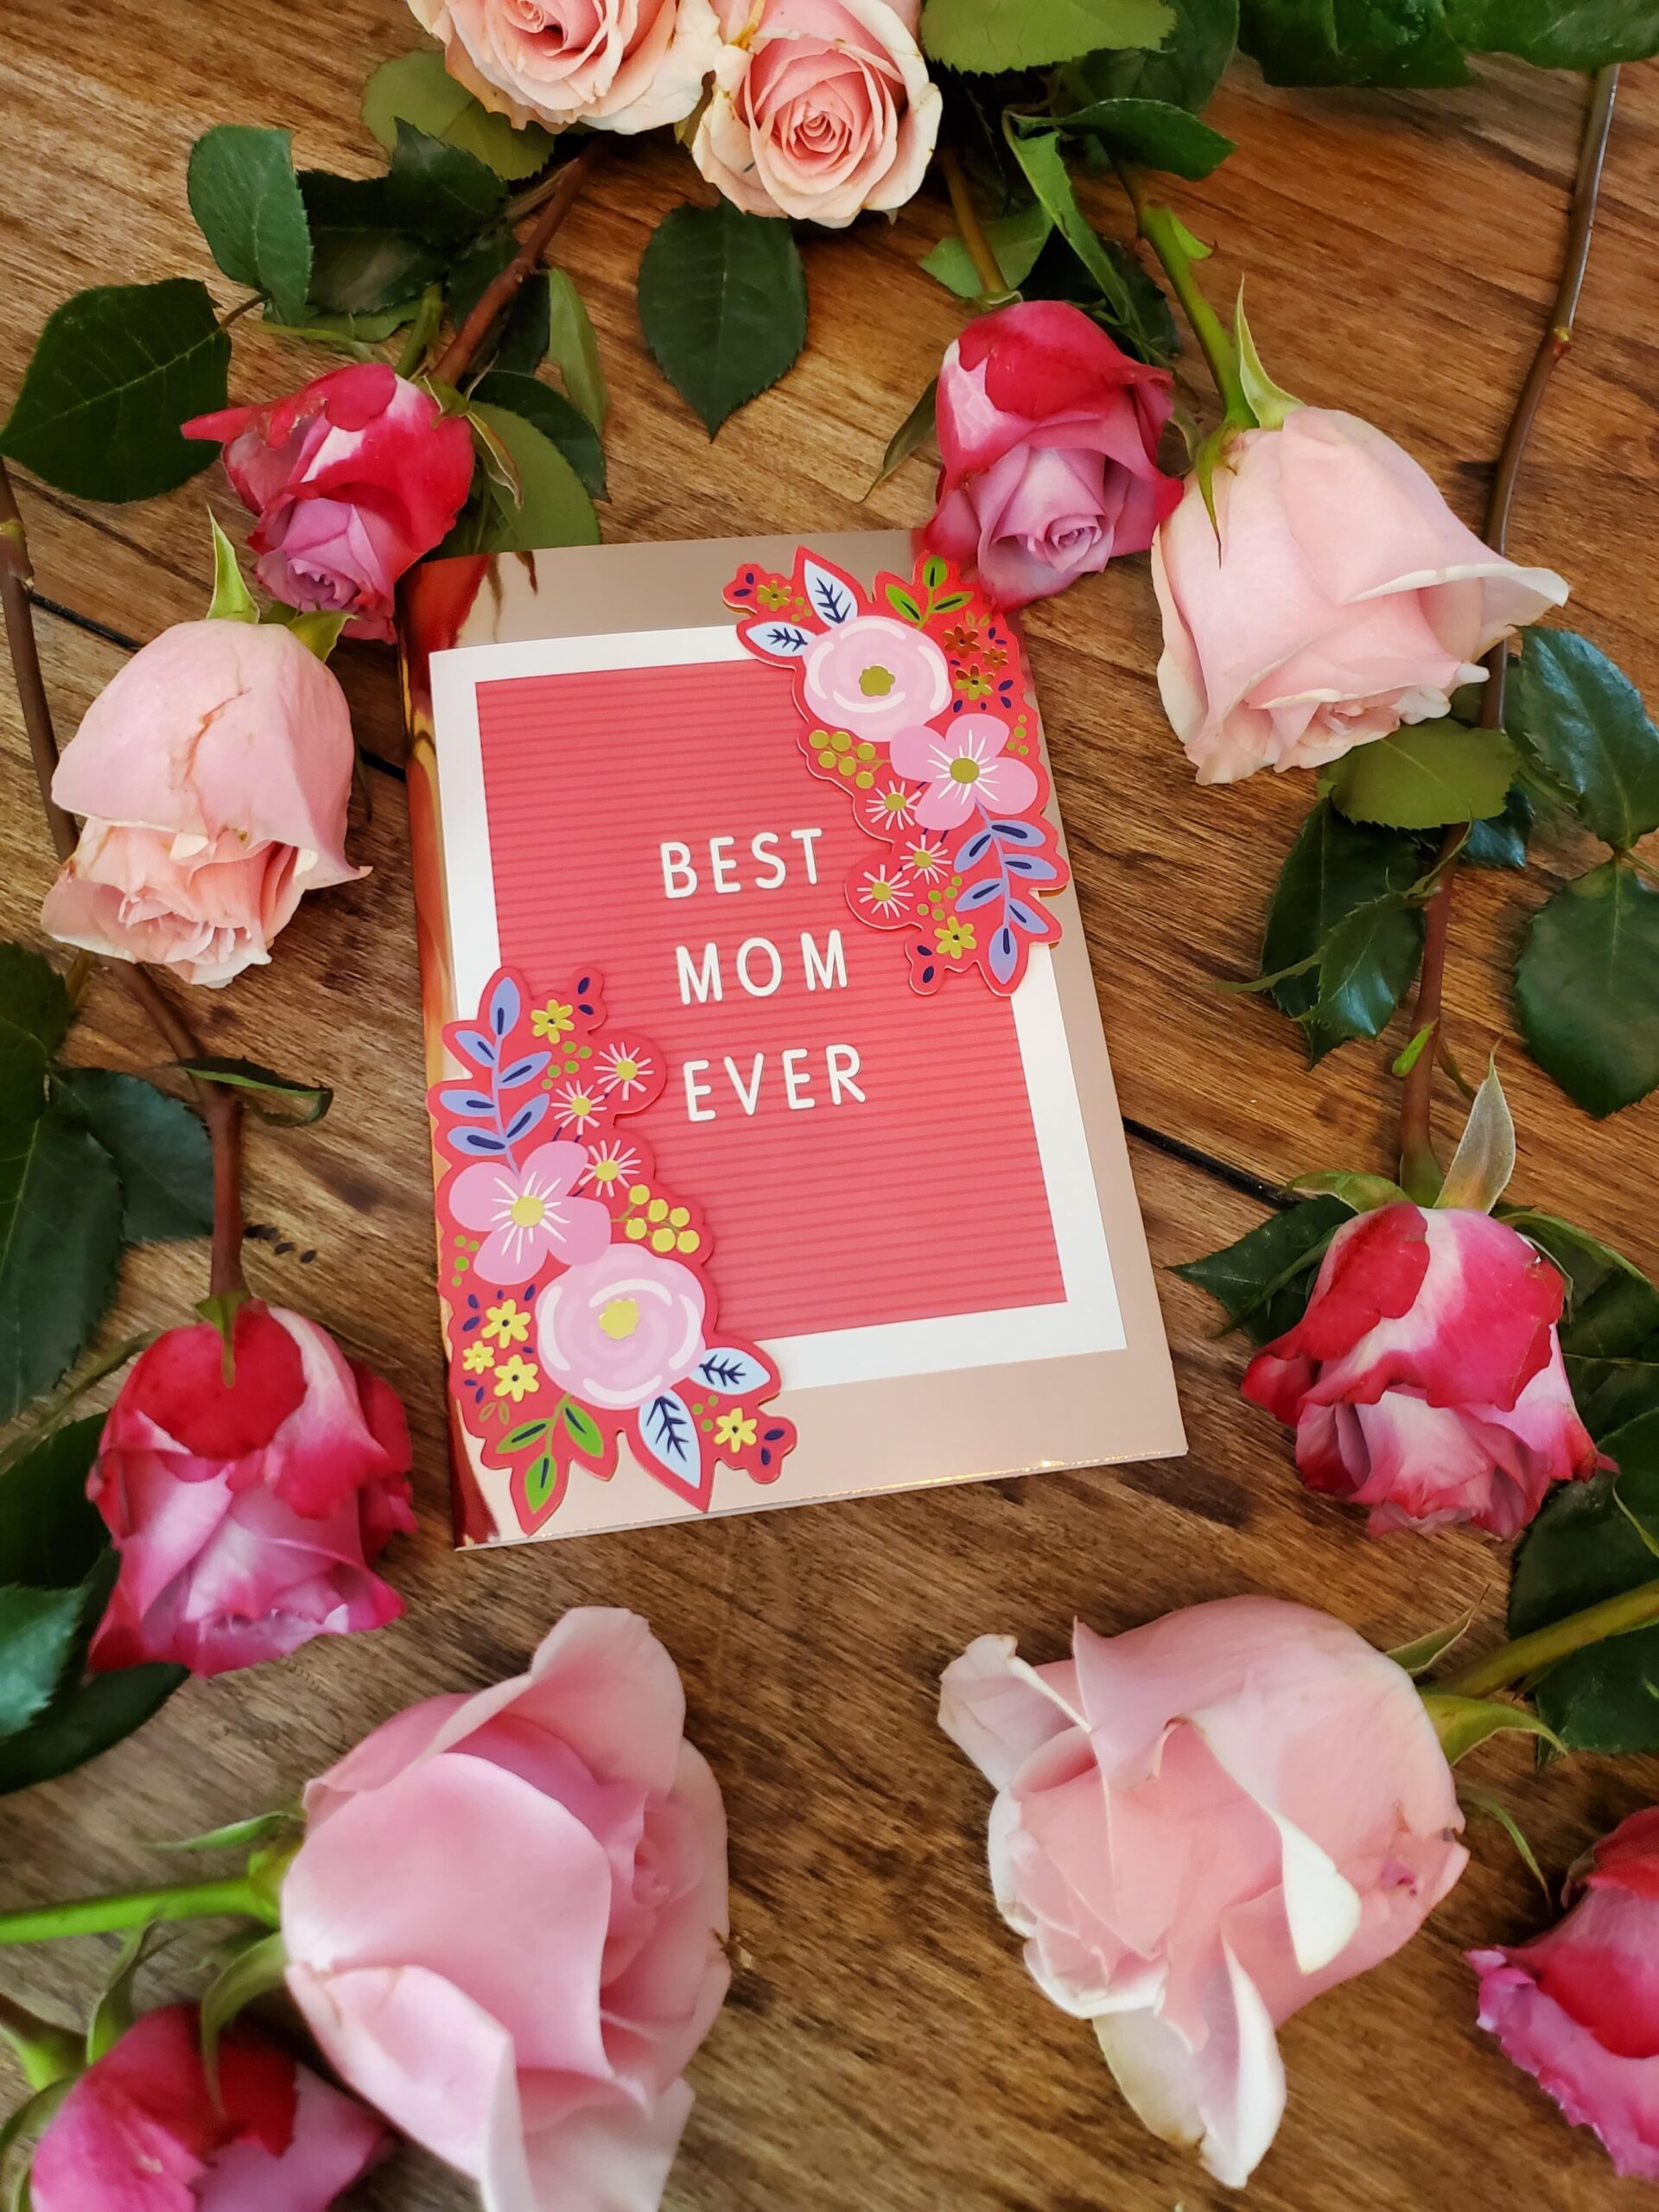 An image of a Mother's Day card for Mother's Day.